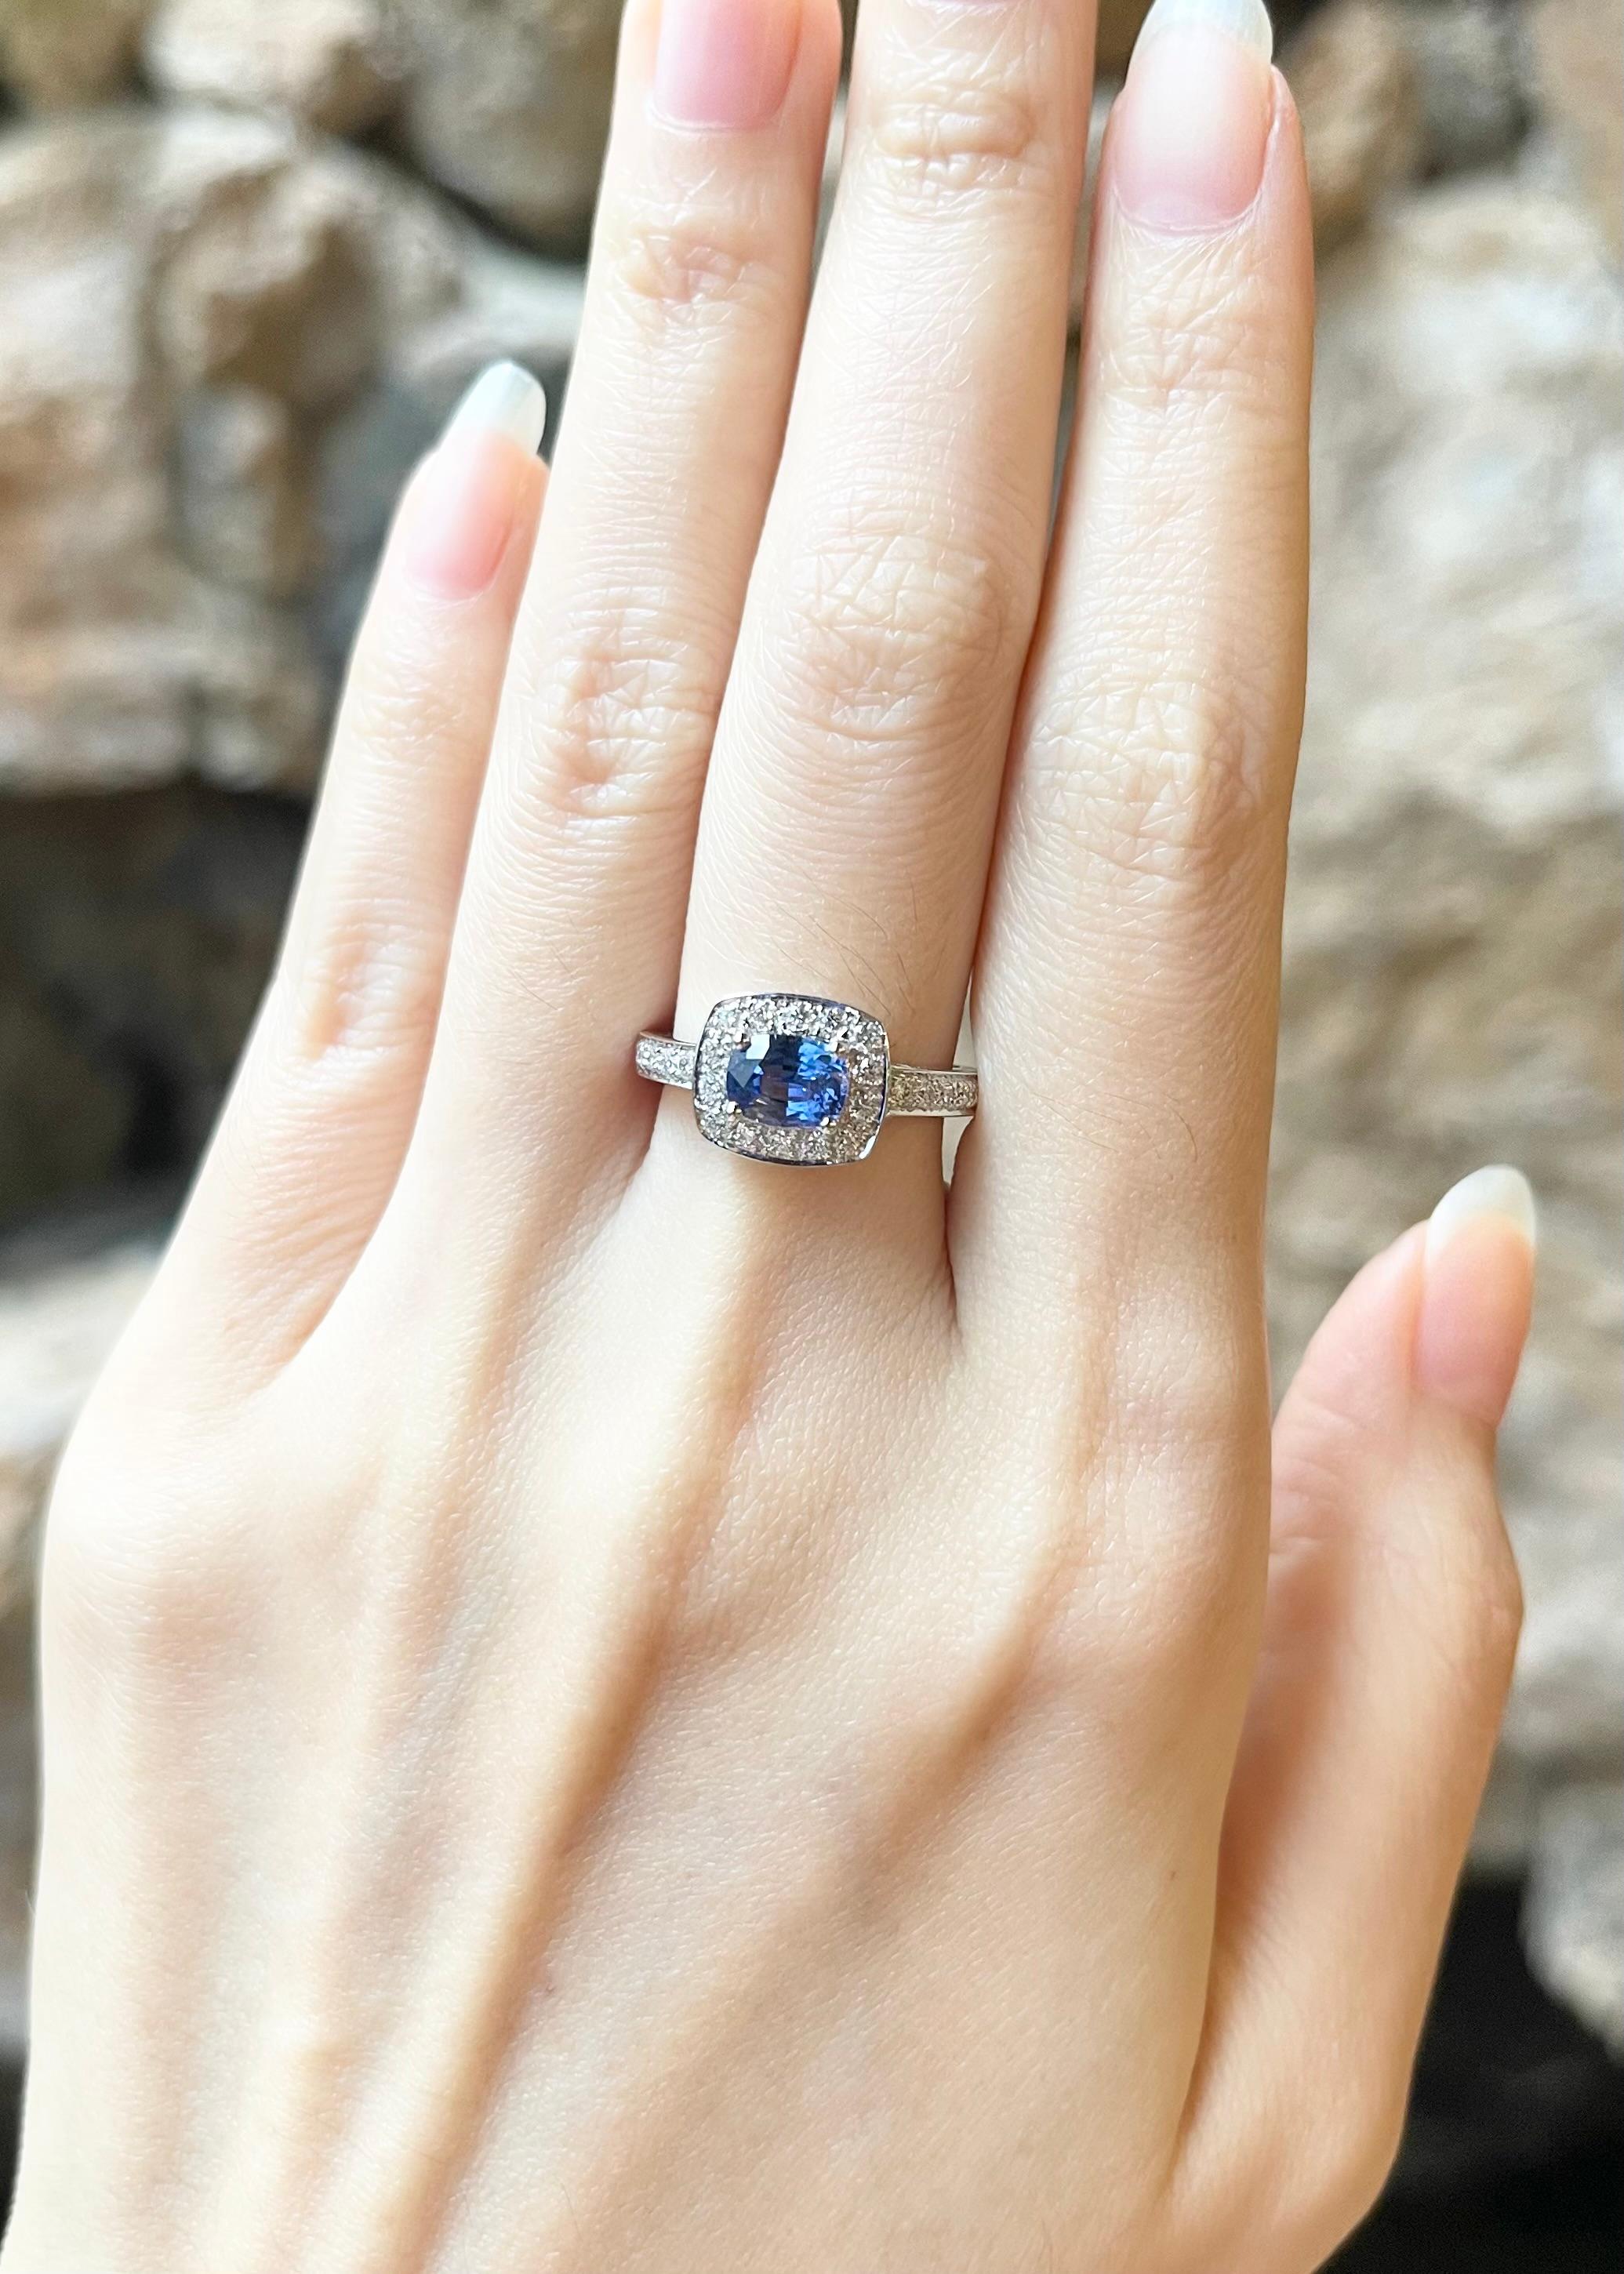 Blue Sapphire 1.98 carats with Diamond 0.36 carat Ring set in 18K White Gold Settings

Width:  1.0 cm 
Length: 0.9 cm
Ring Size: 53
Total Weight: 4.69 grams

